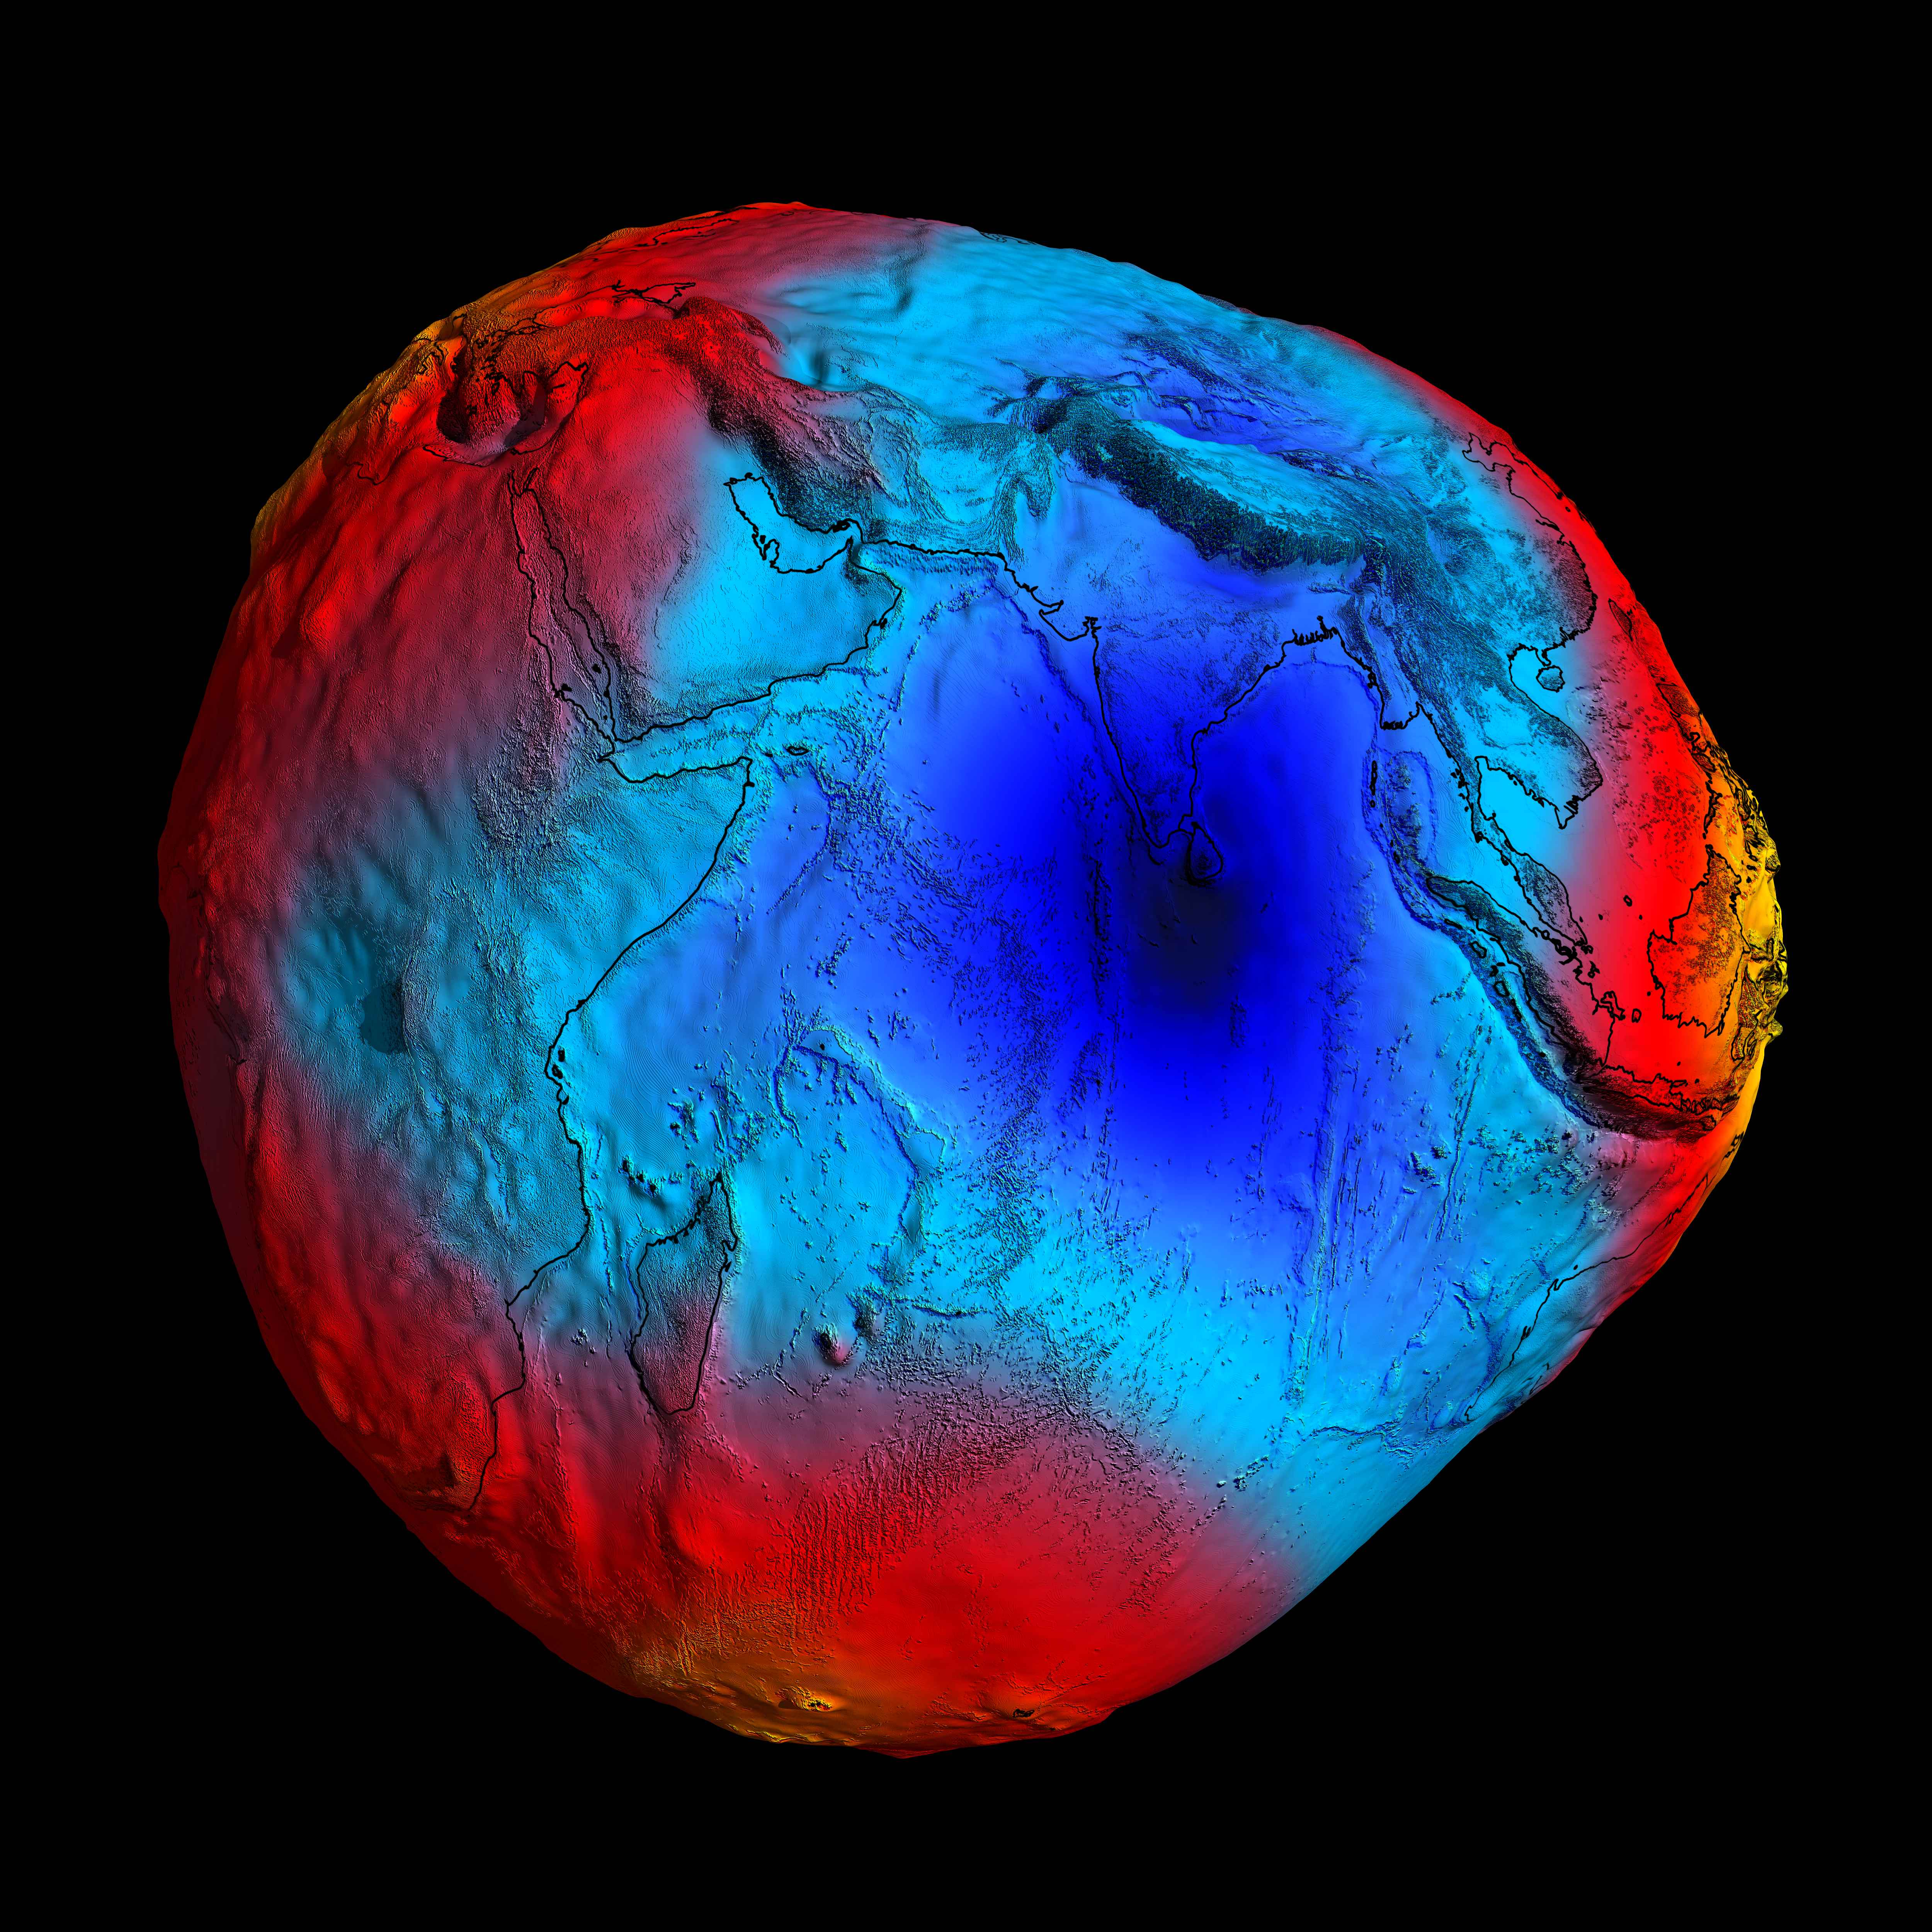 An image of a red, blue, and green planet.